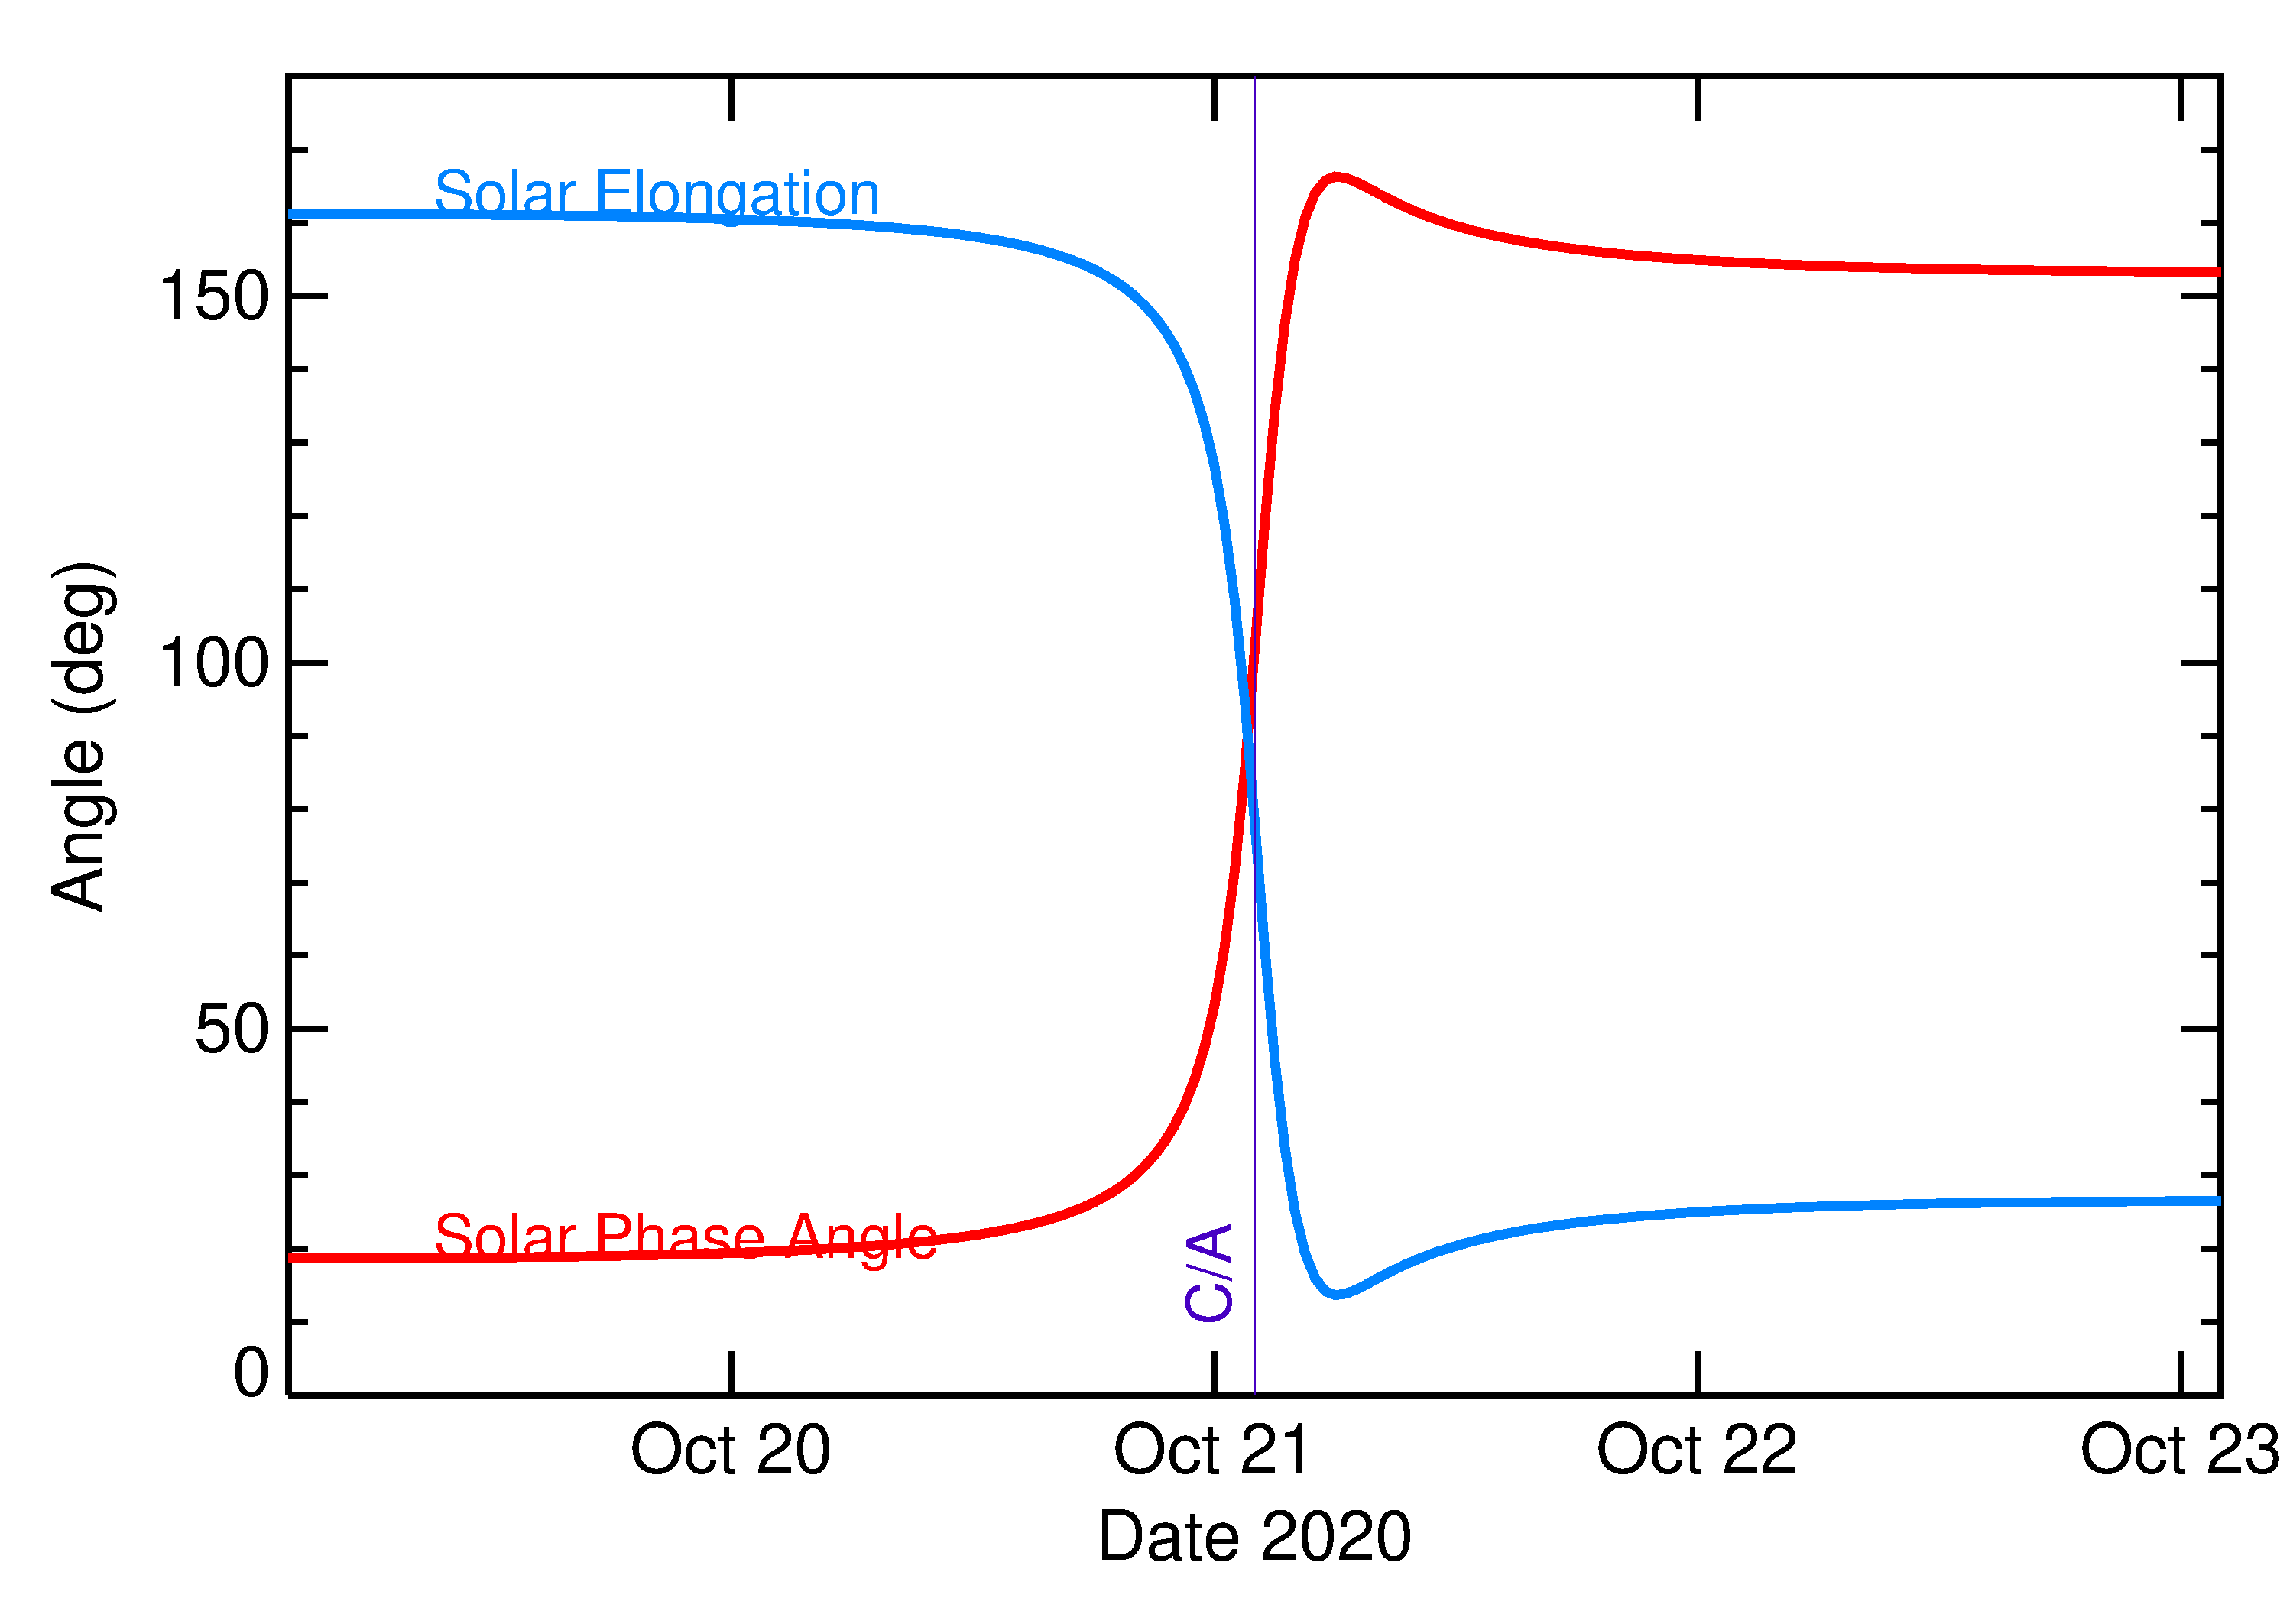 Solar Elongation and Solar Phase Angle of 2020 UA in the days around closest approach